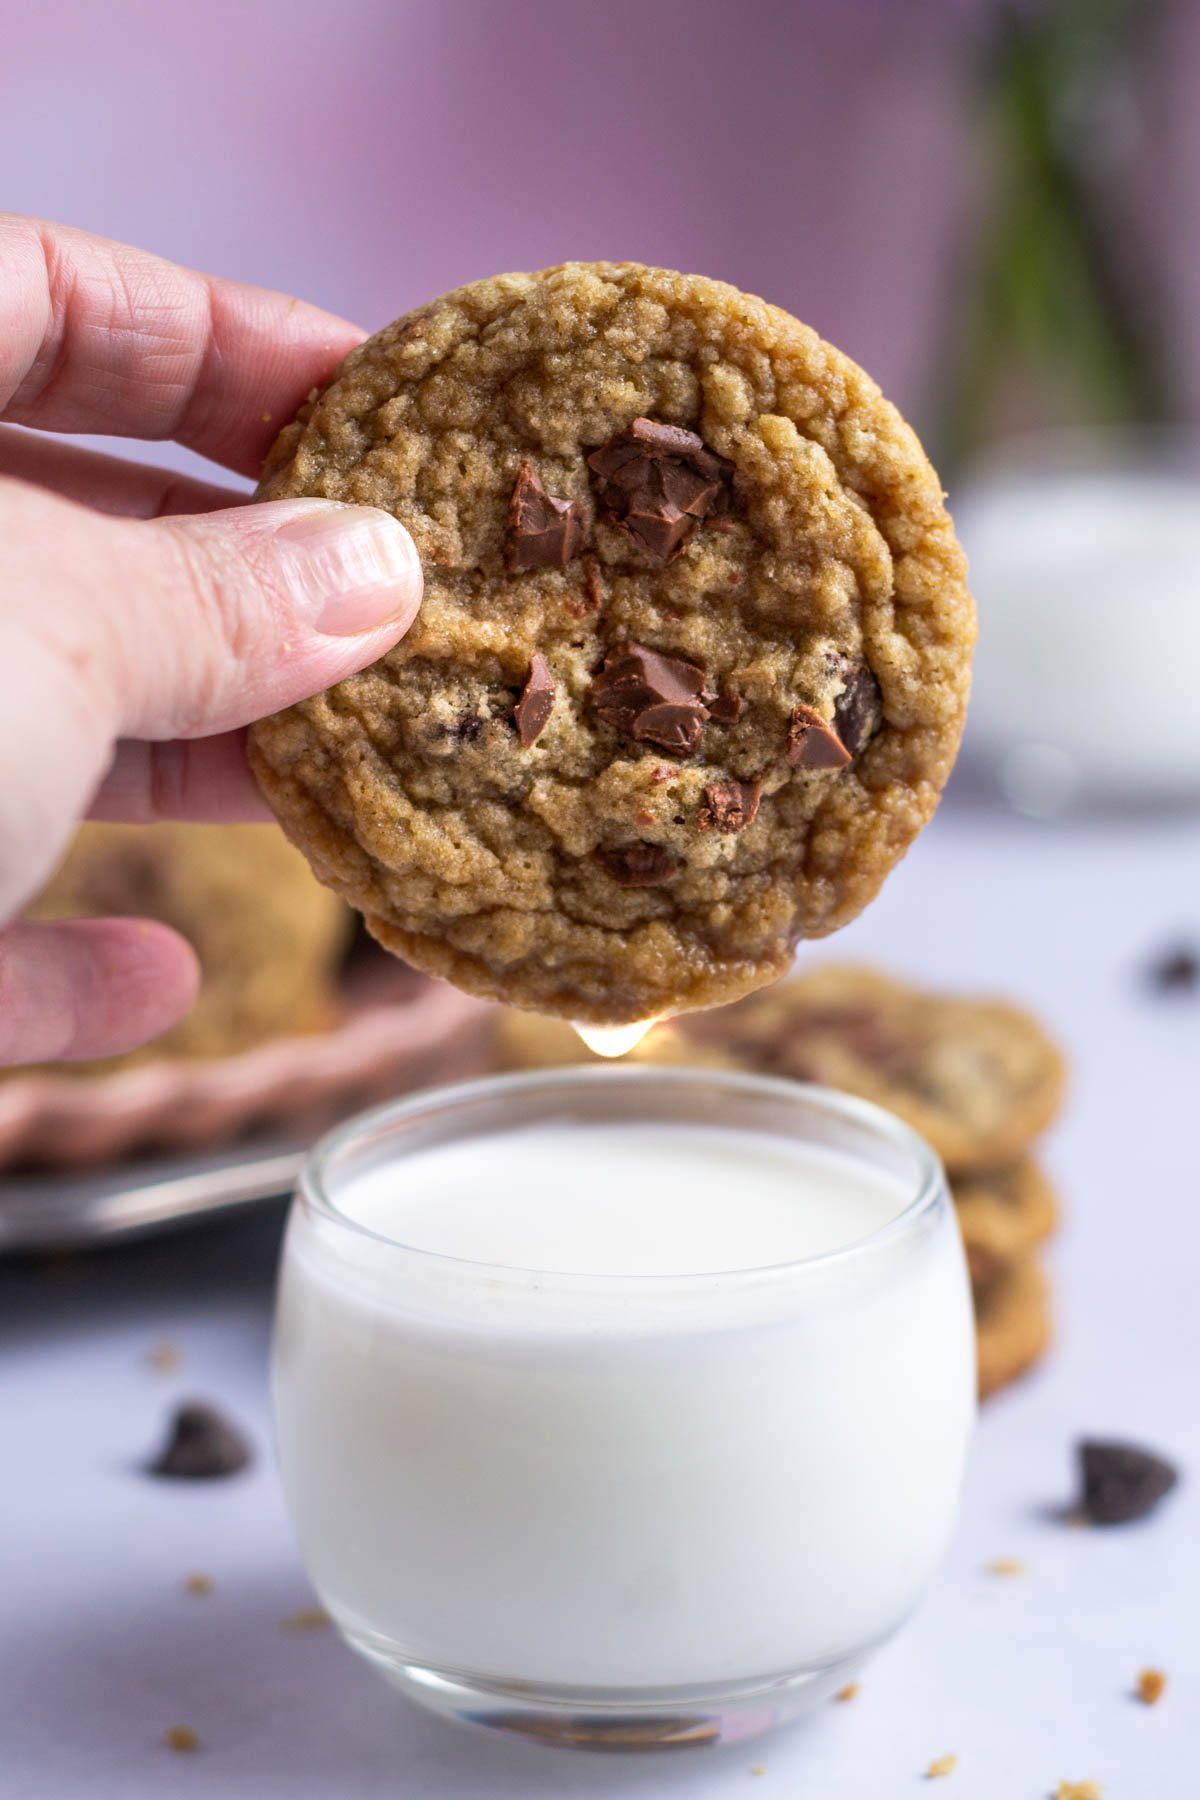 egg free chocolate chip cookies being dipped into milk